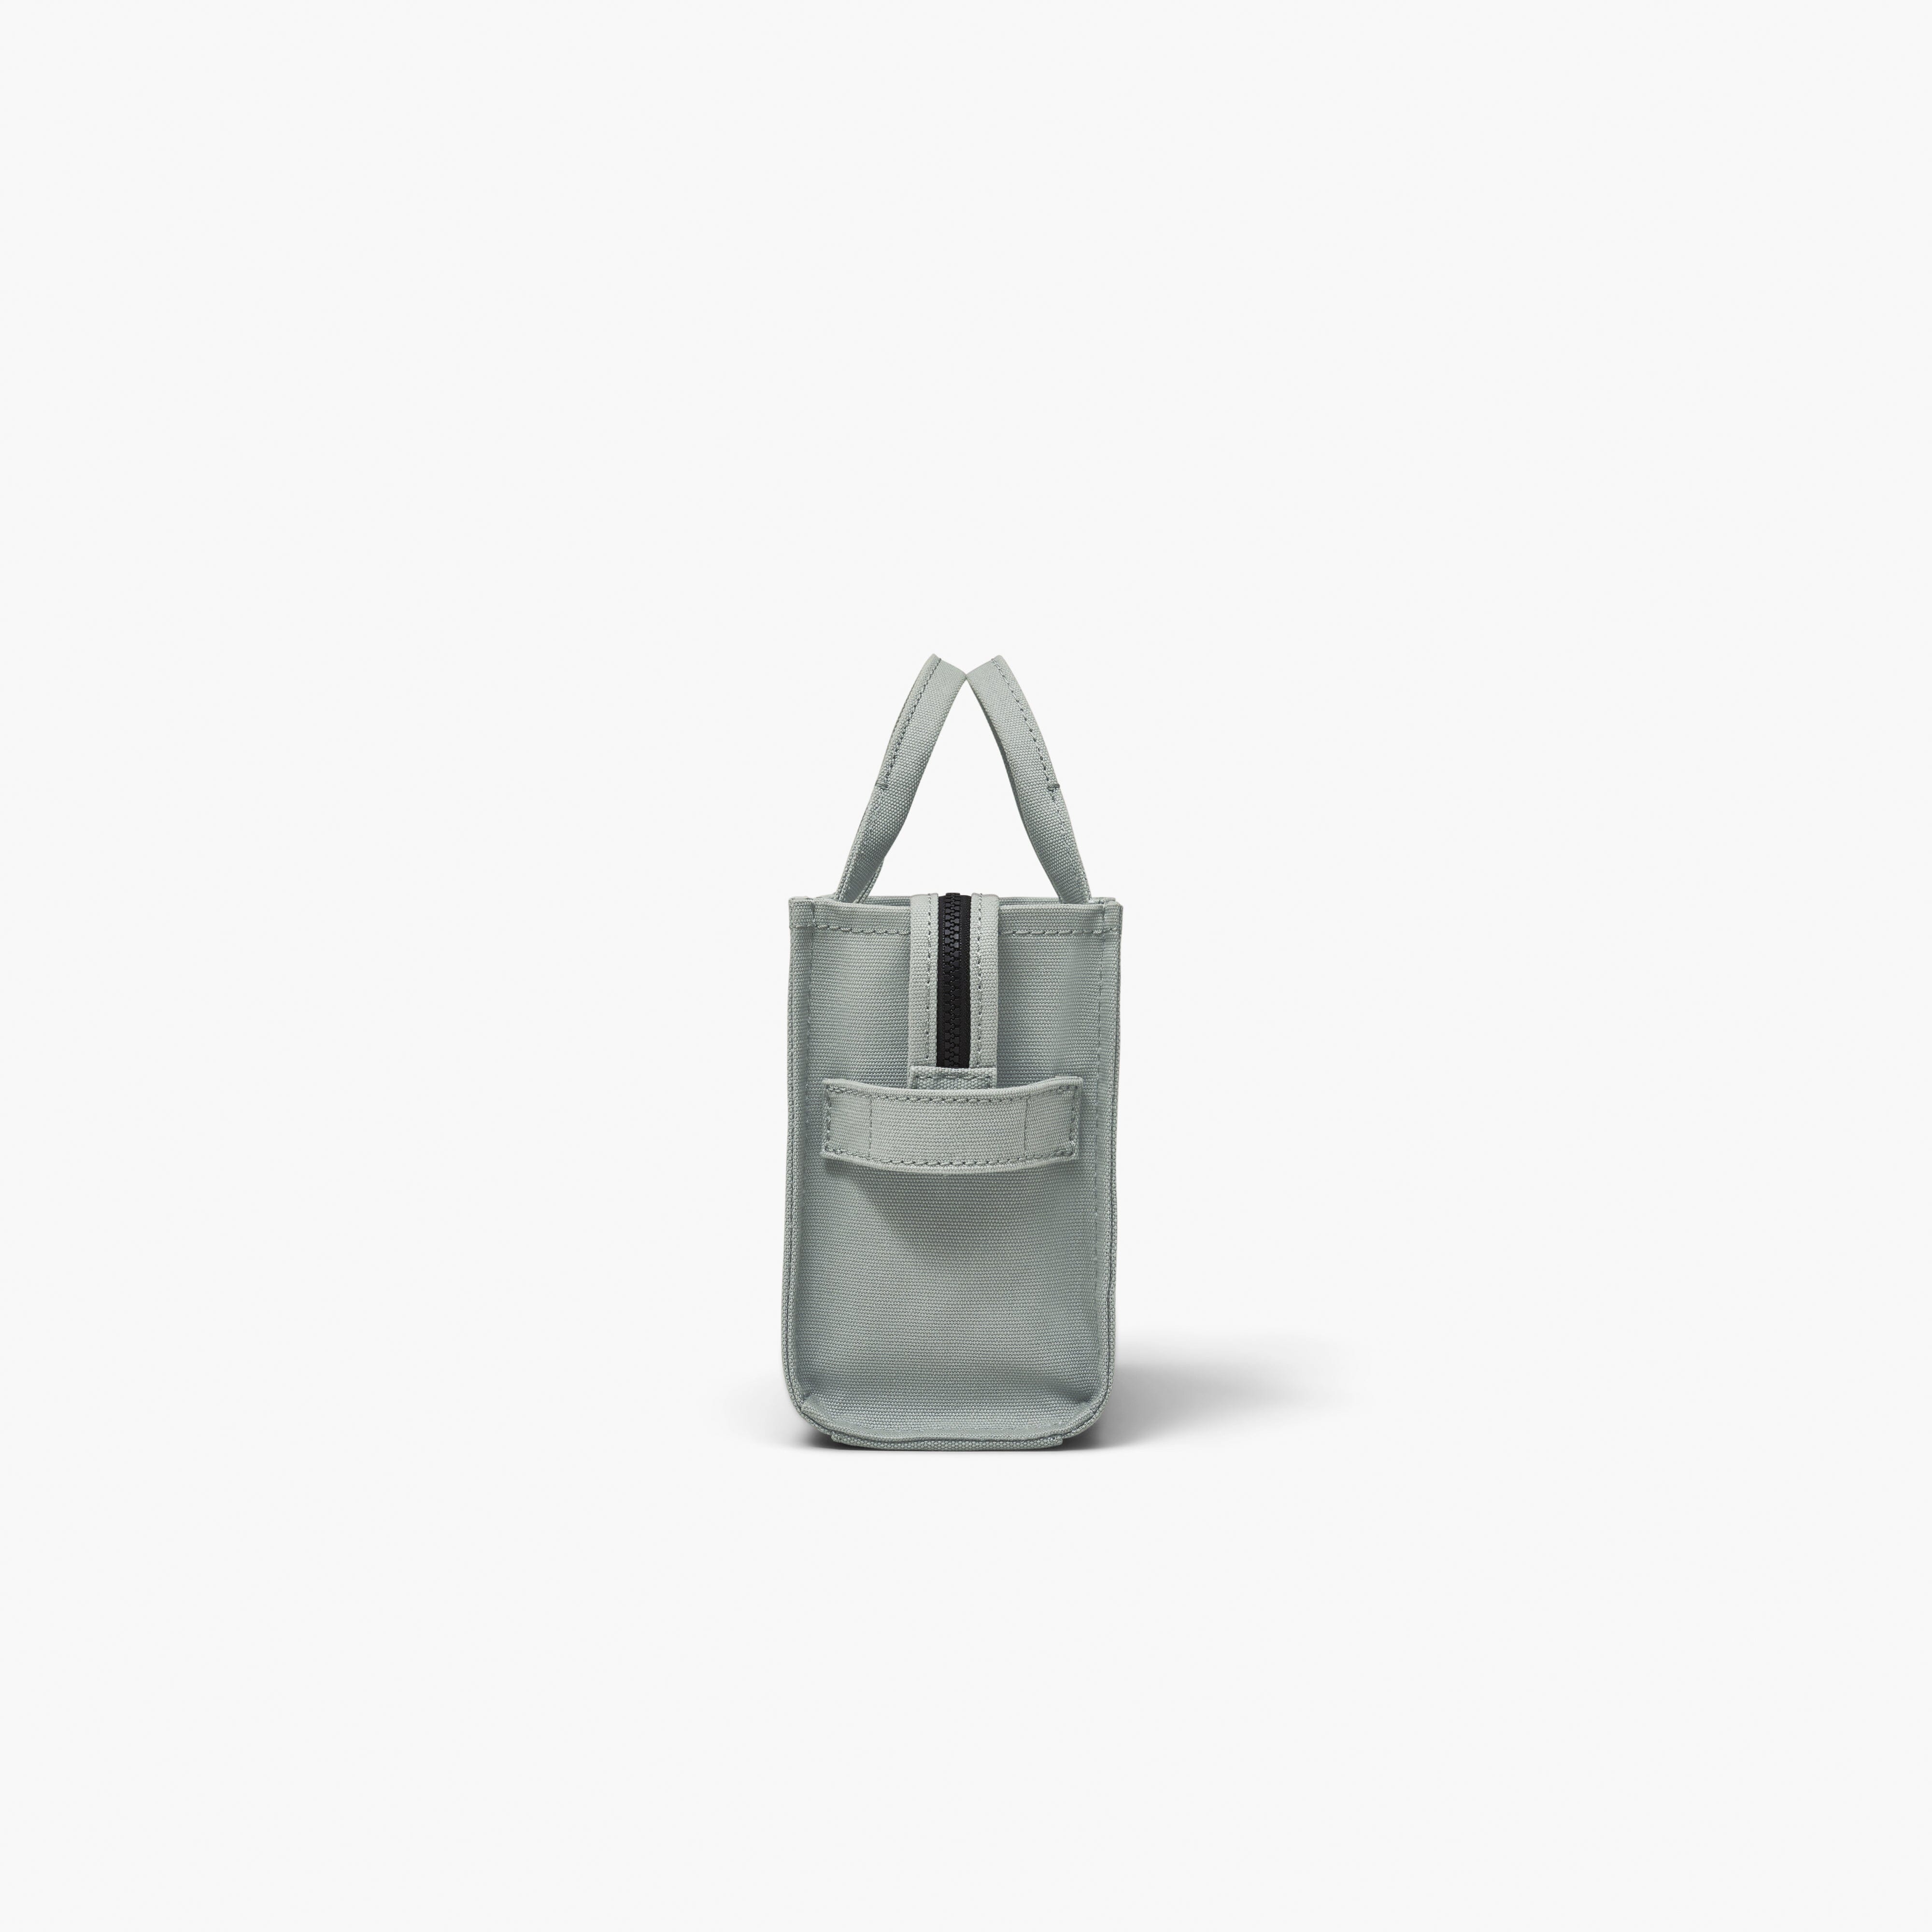 MARC JACOBS - M0016493-050 - The Summer Small Tote Bag - Wolf Grey Borse Marc Jacobs 